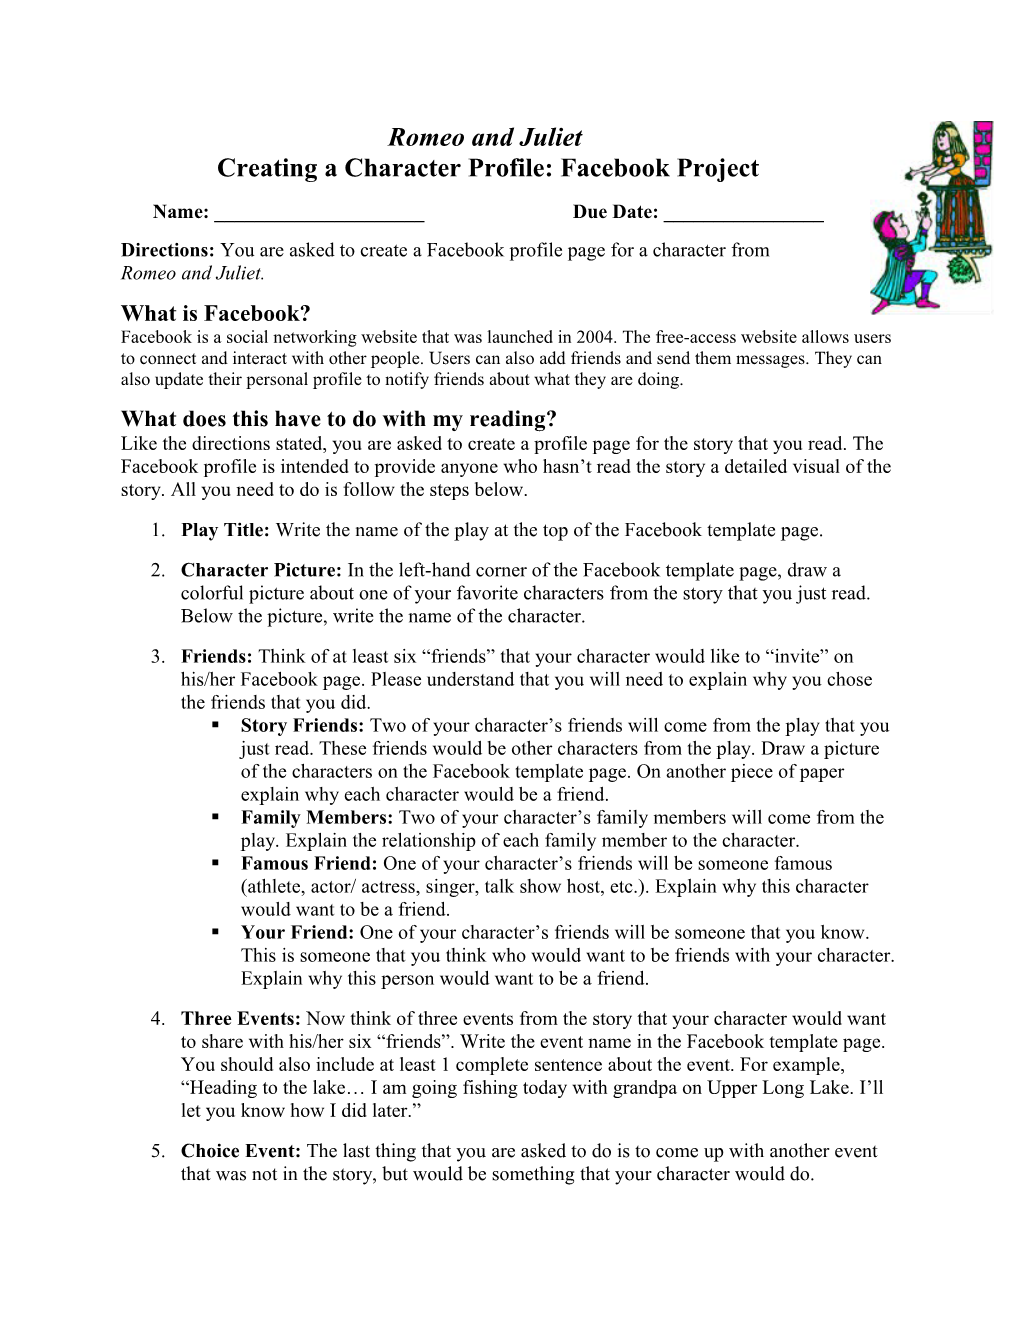 Creating a Character Profile: Facebook Project